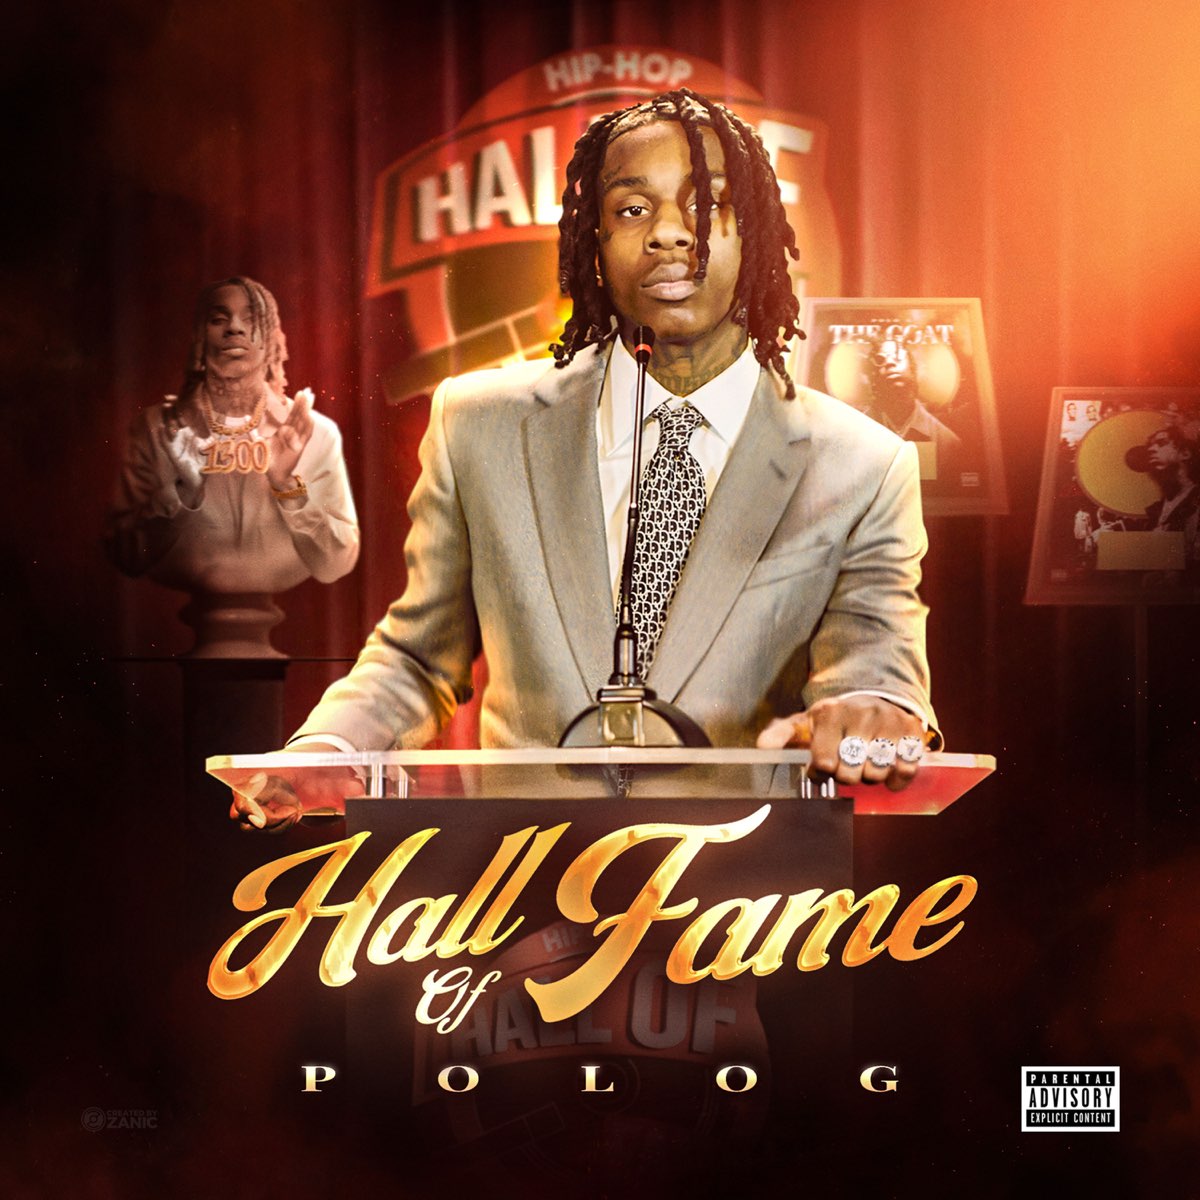 ‎Hall of Fame by Polo G on Apple Music